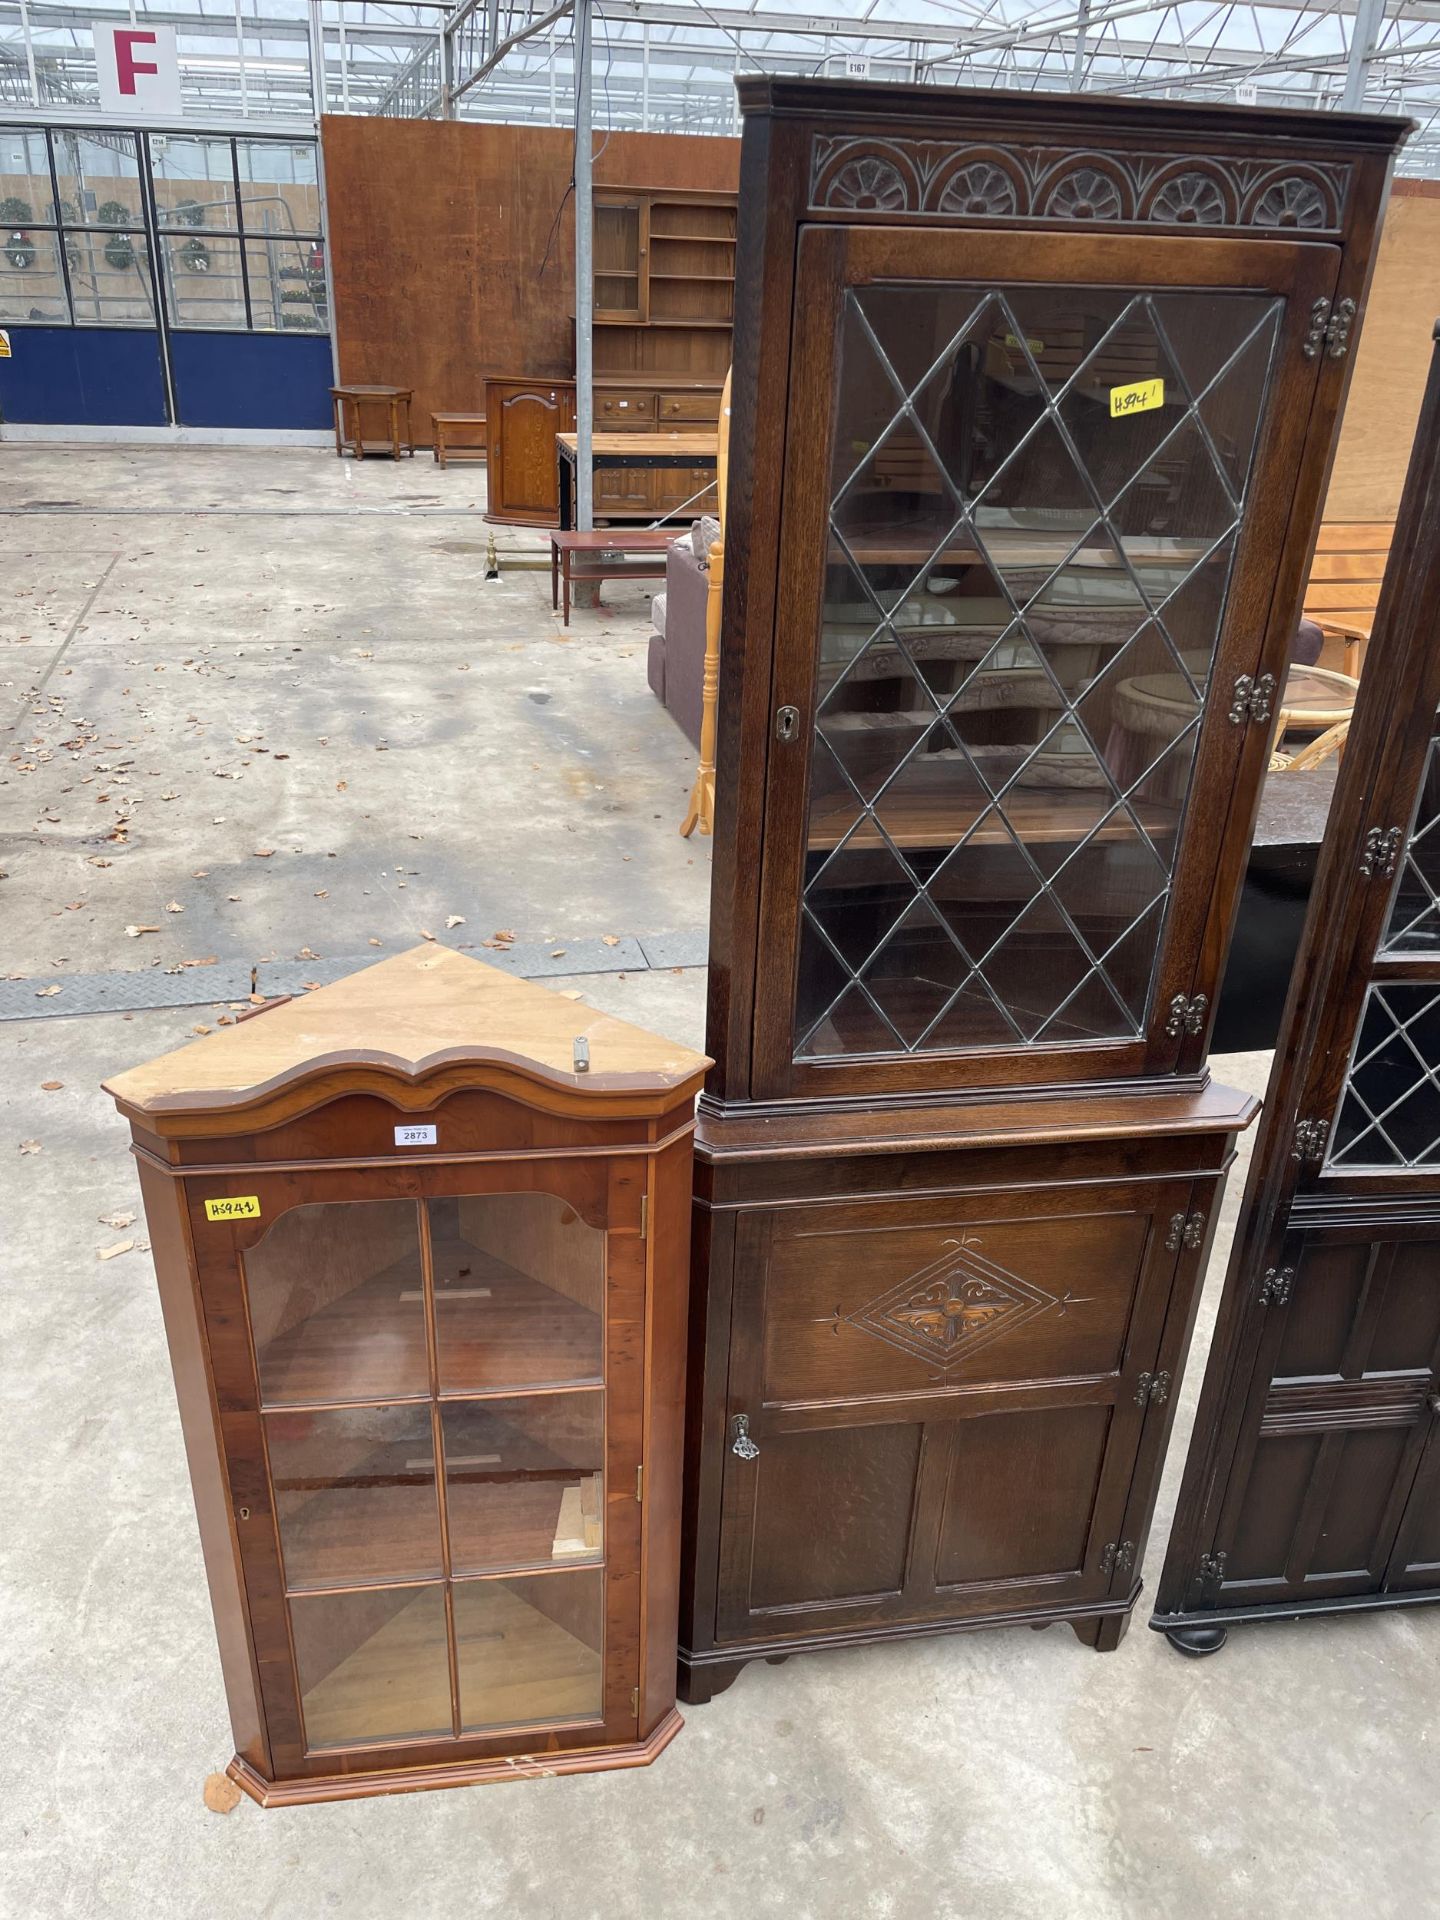 YEW WOOD CORNER CUPBOARD AND OAK CORNER CUPBOARD WITH GLAZED AND LEADED UPPER PORTION